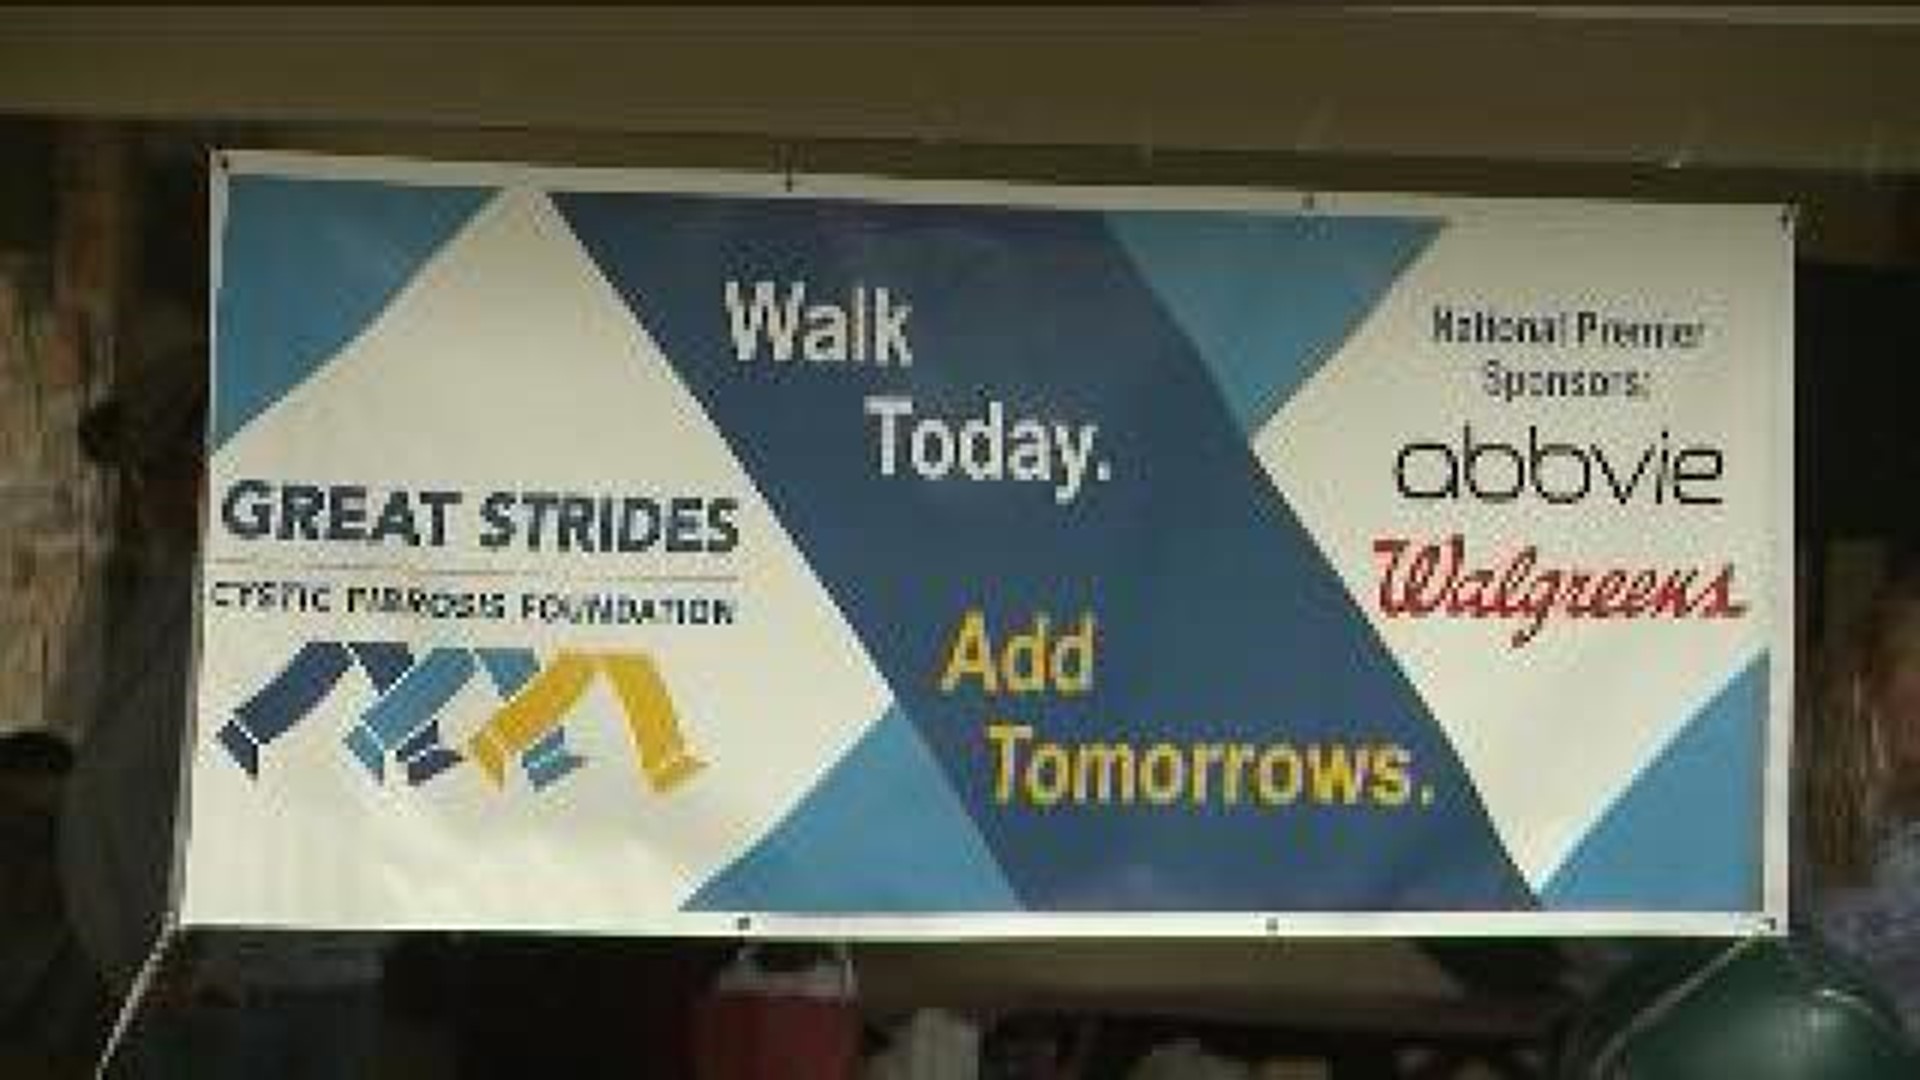 Making Strides for Cystic Fibrosis